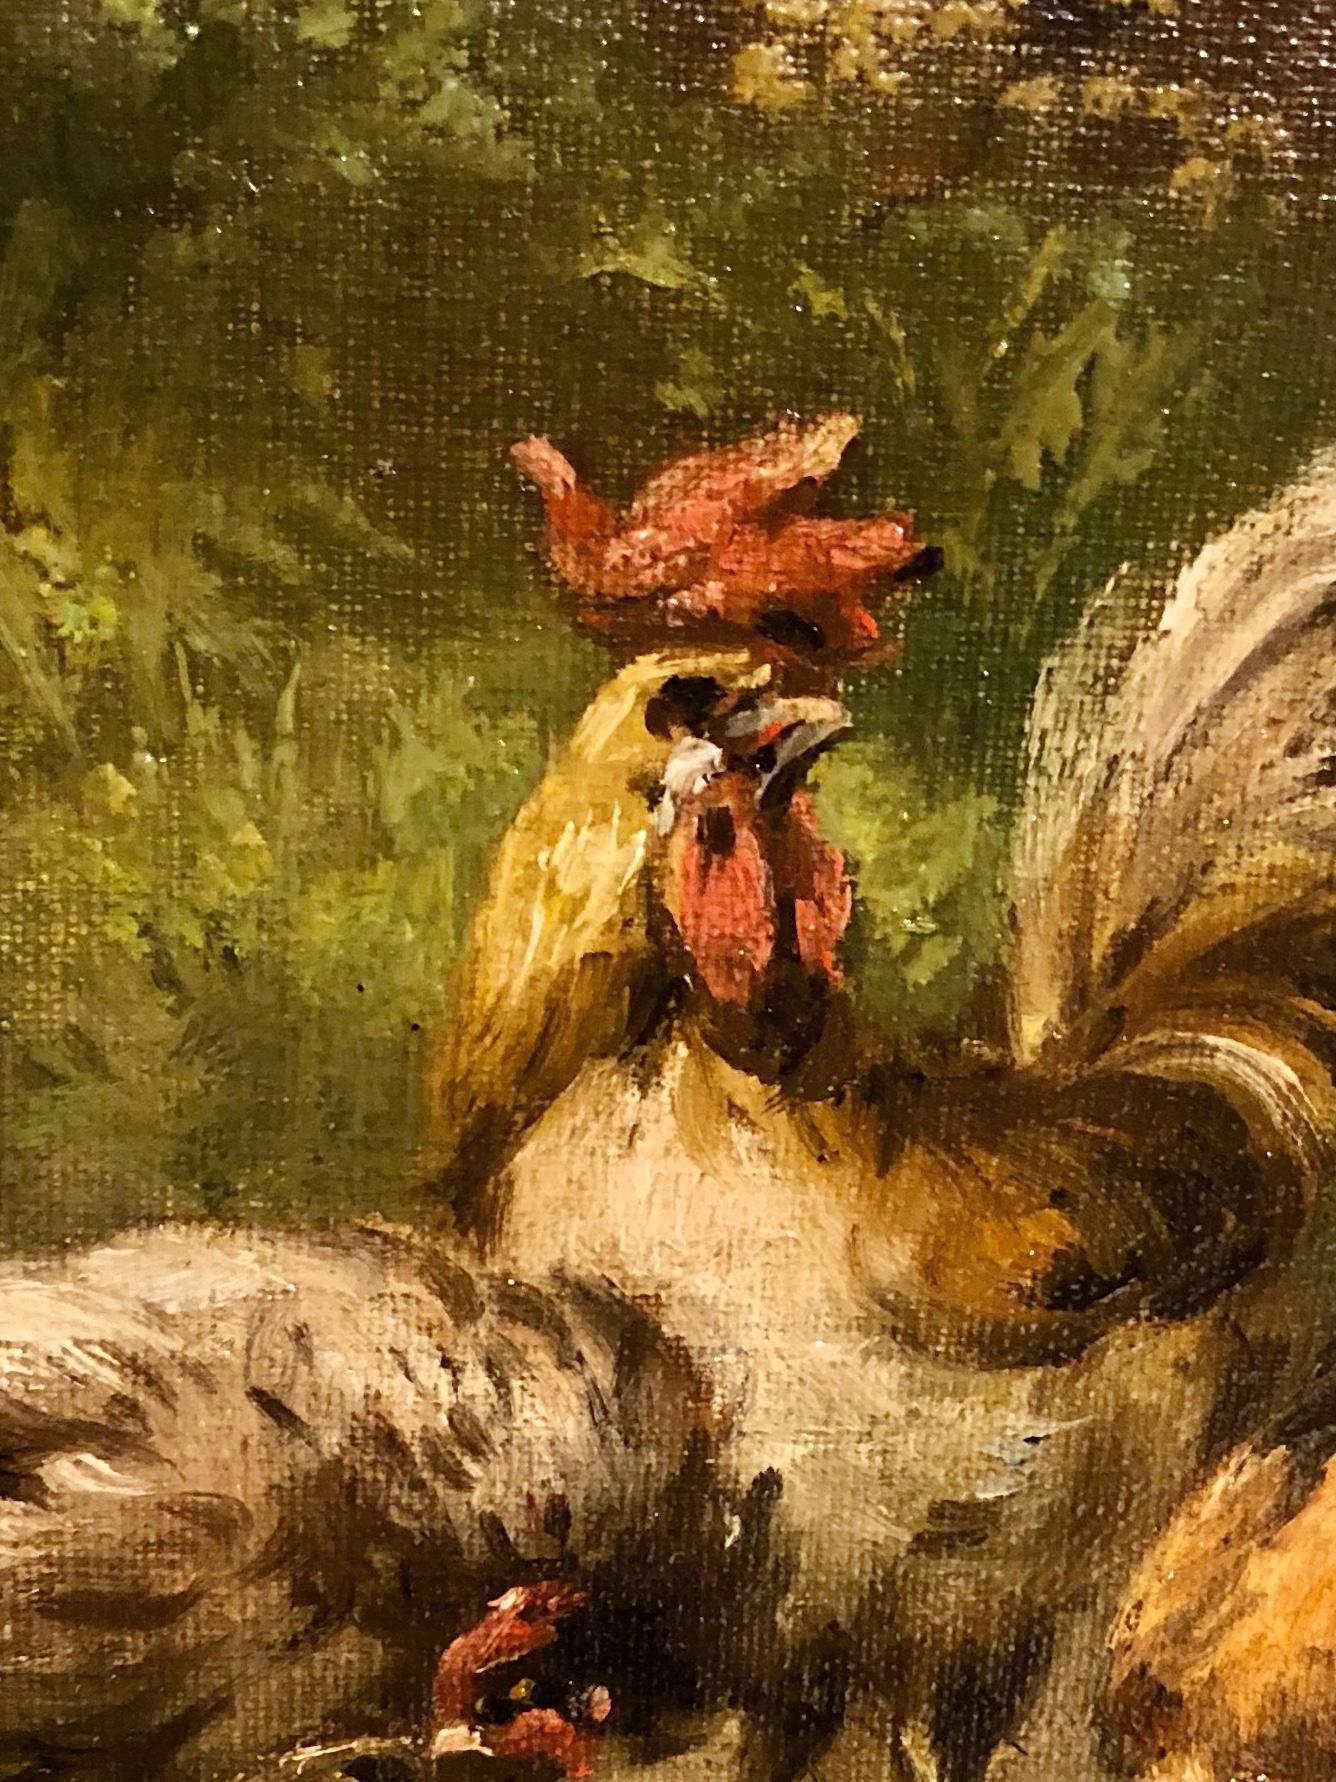 The artist Louis Marie Lemaire was a Parisien artist and well known for his paintings of poultry and still life with good colour and atmosphere. This pair is a good example of both these attributes, giving each chicken their own expression and mood